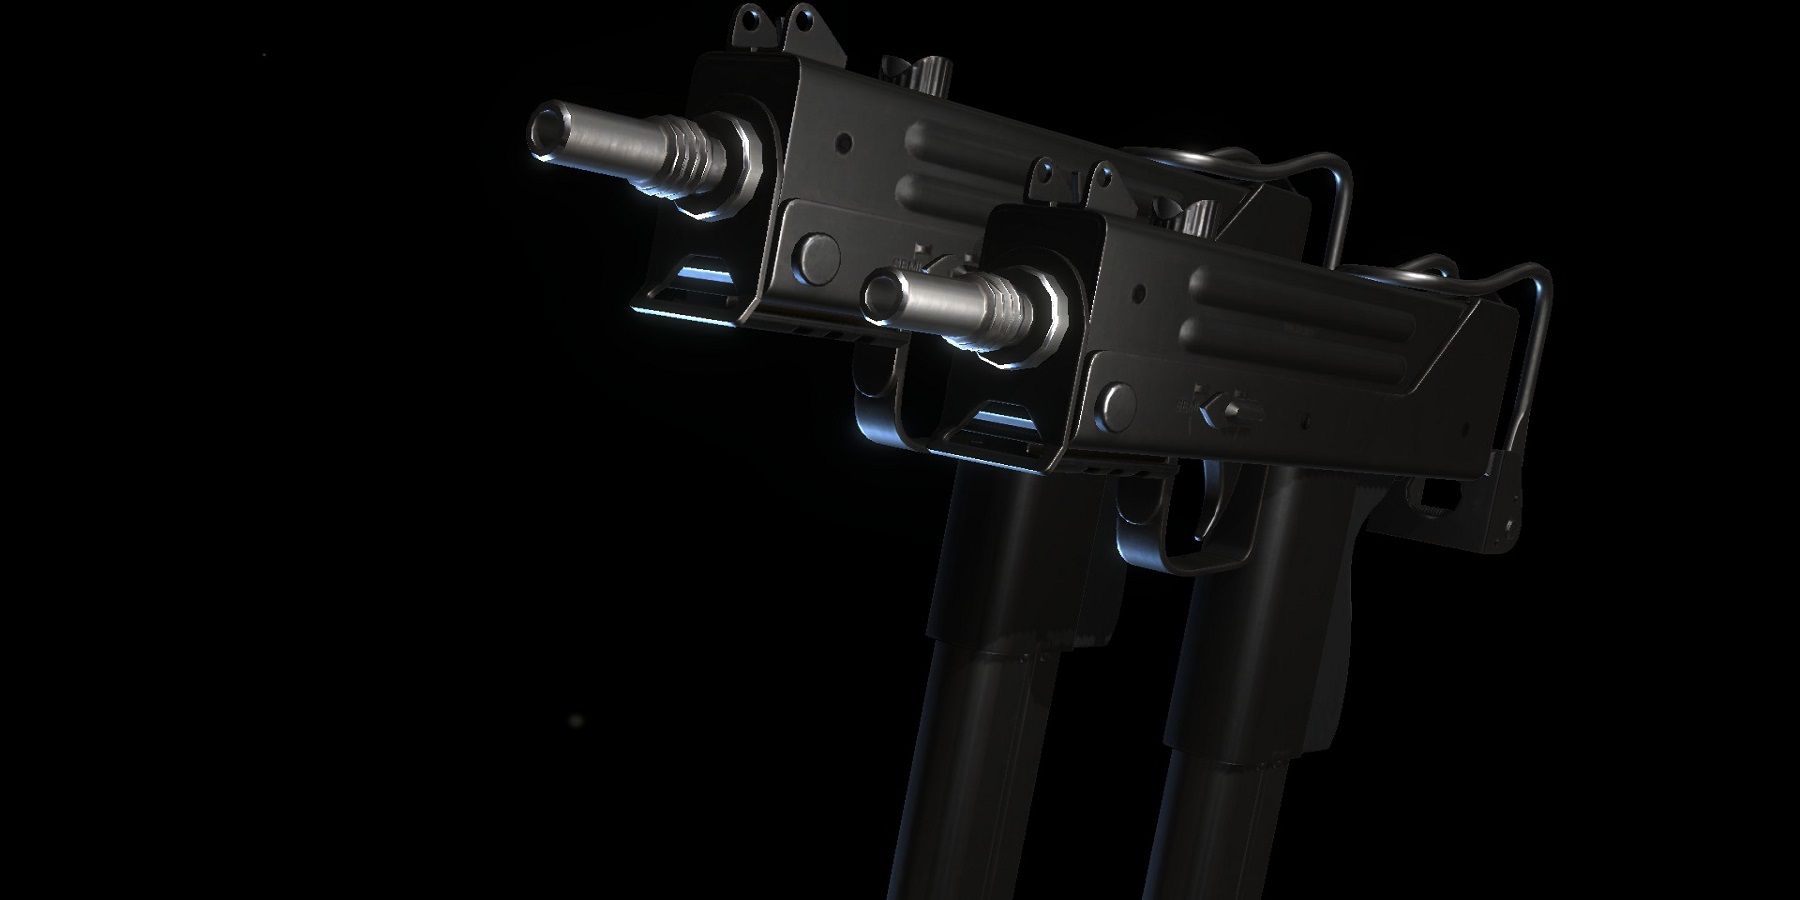 The Dual Mac10 from Combat Master.